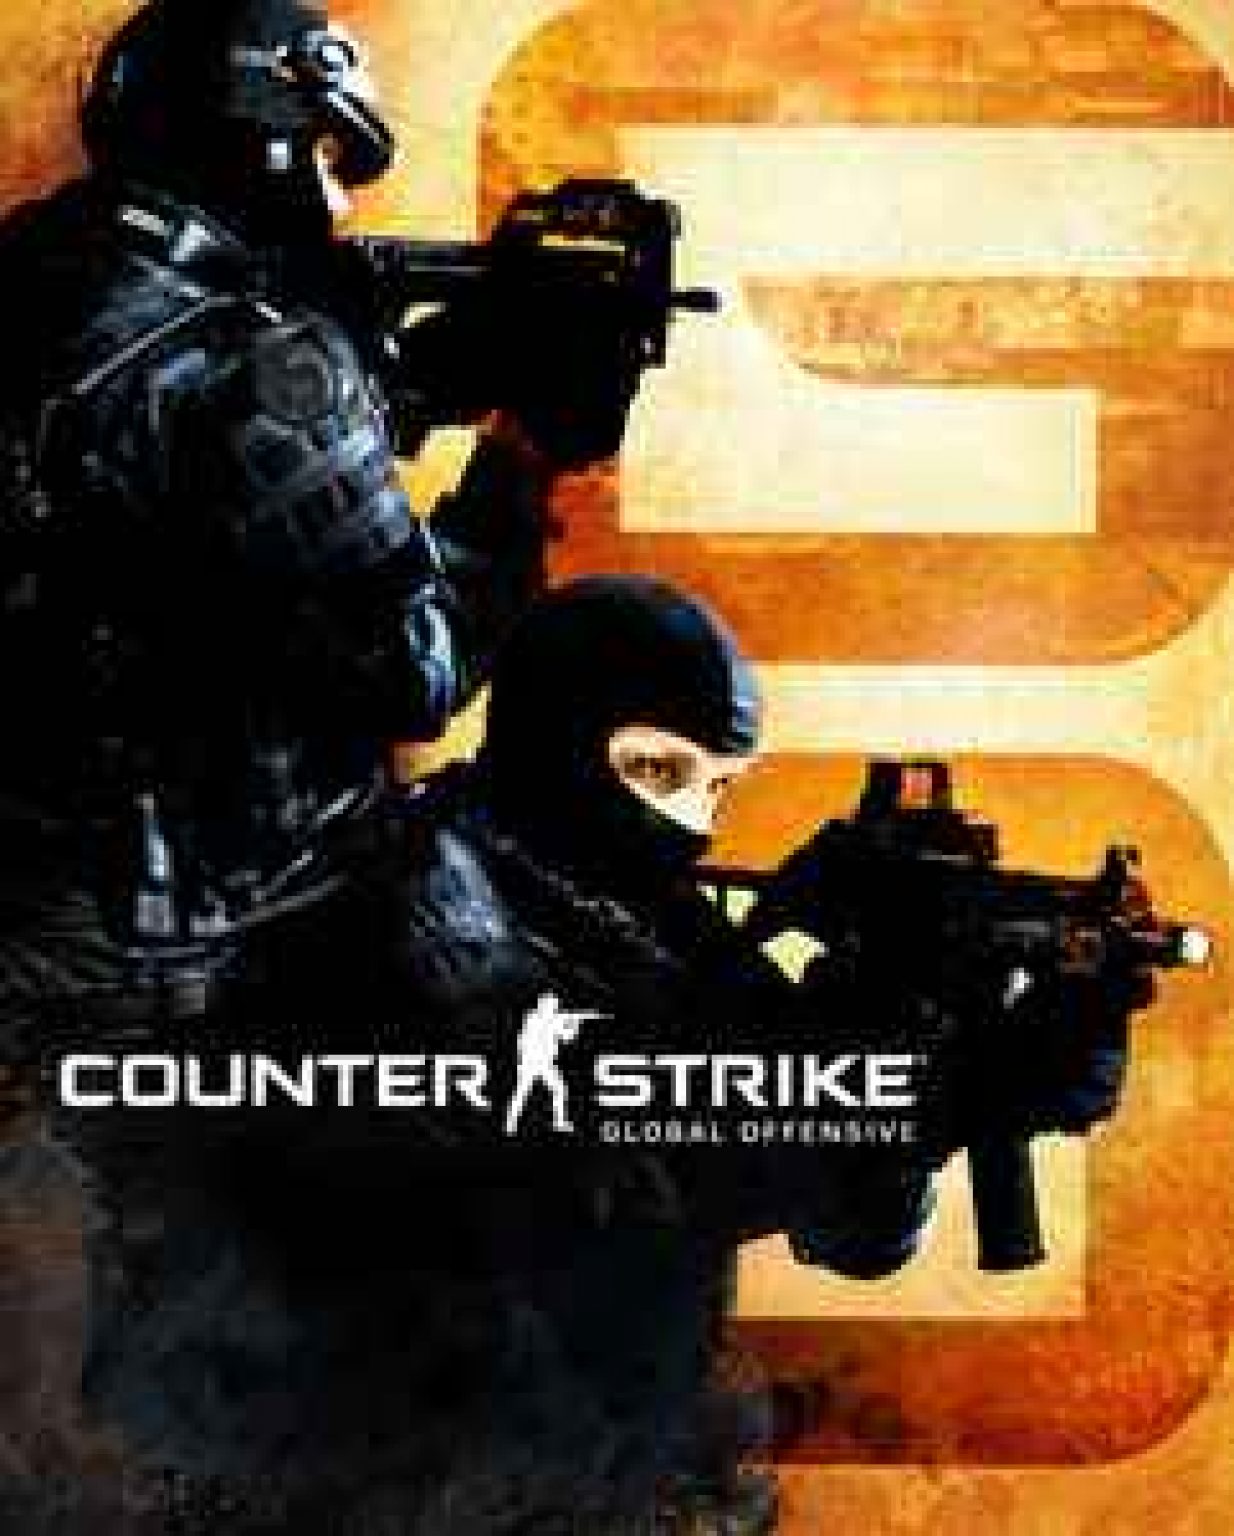 counter strike global offensive highly compressed 500mb